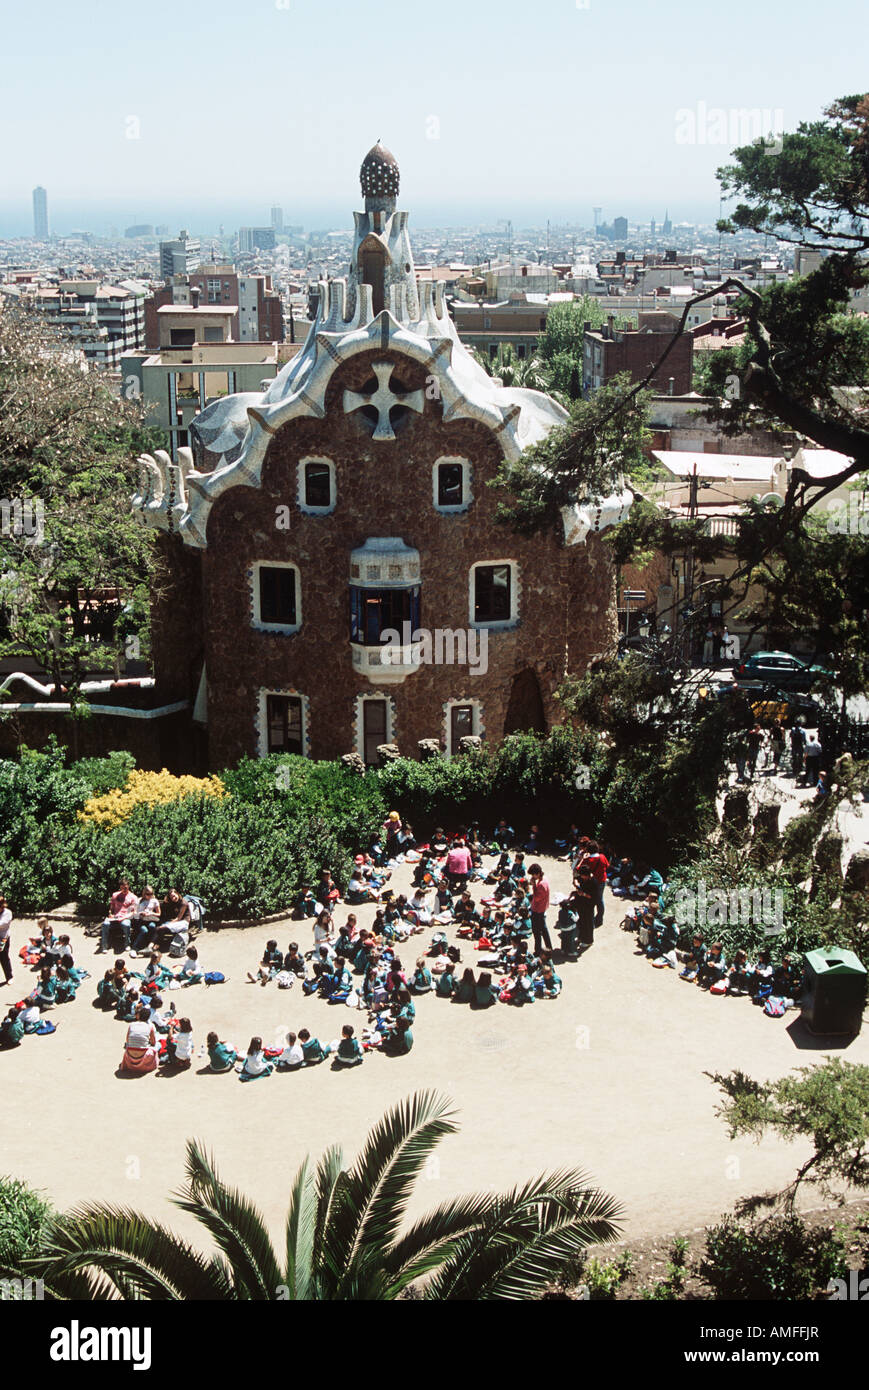 Party of schoolchildren on school trip in front of building, Guell Park, Barcelona, Spain Stock Photo